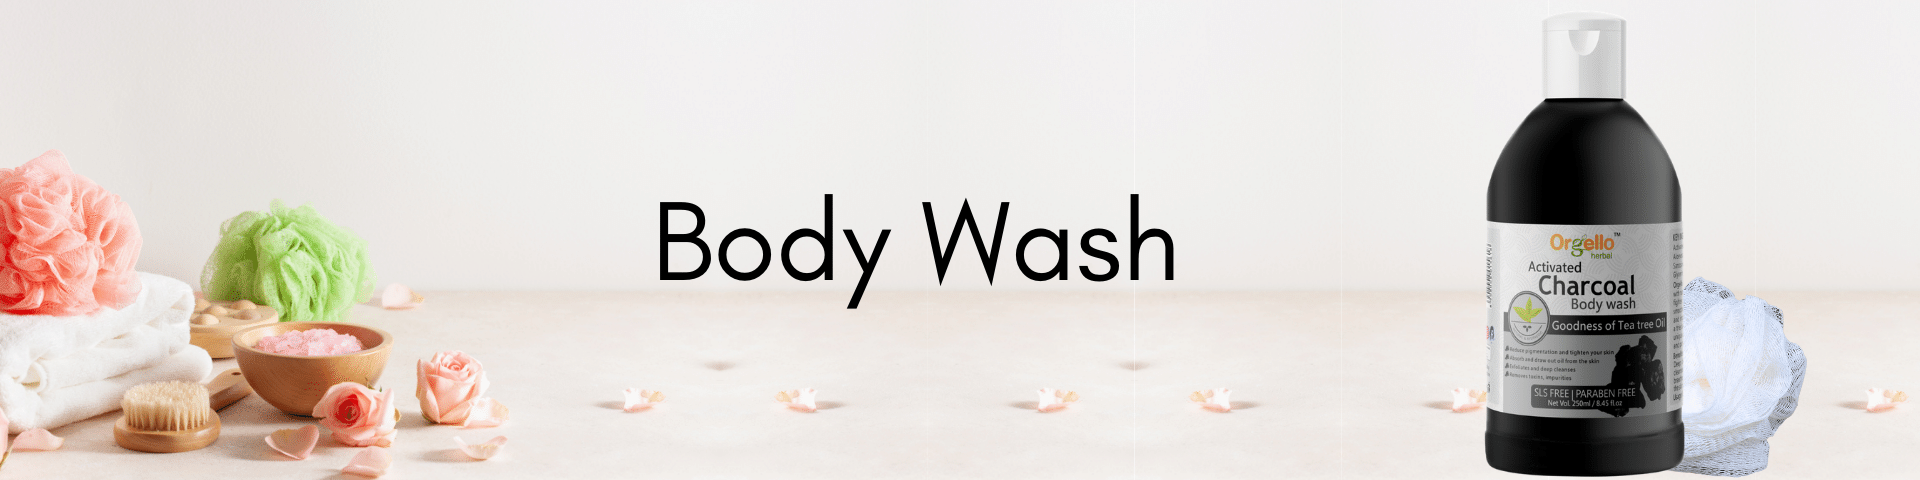 body wash banner for product page